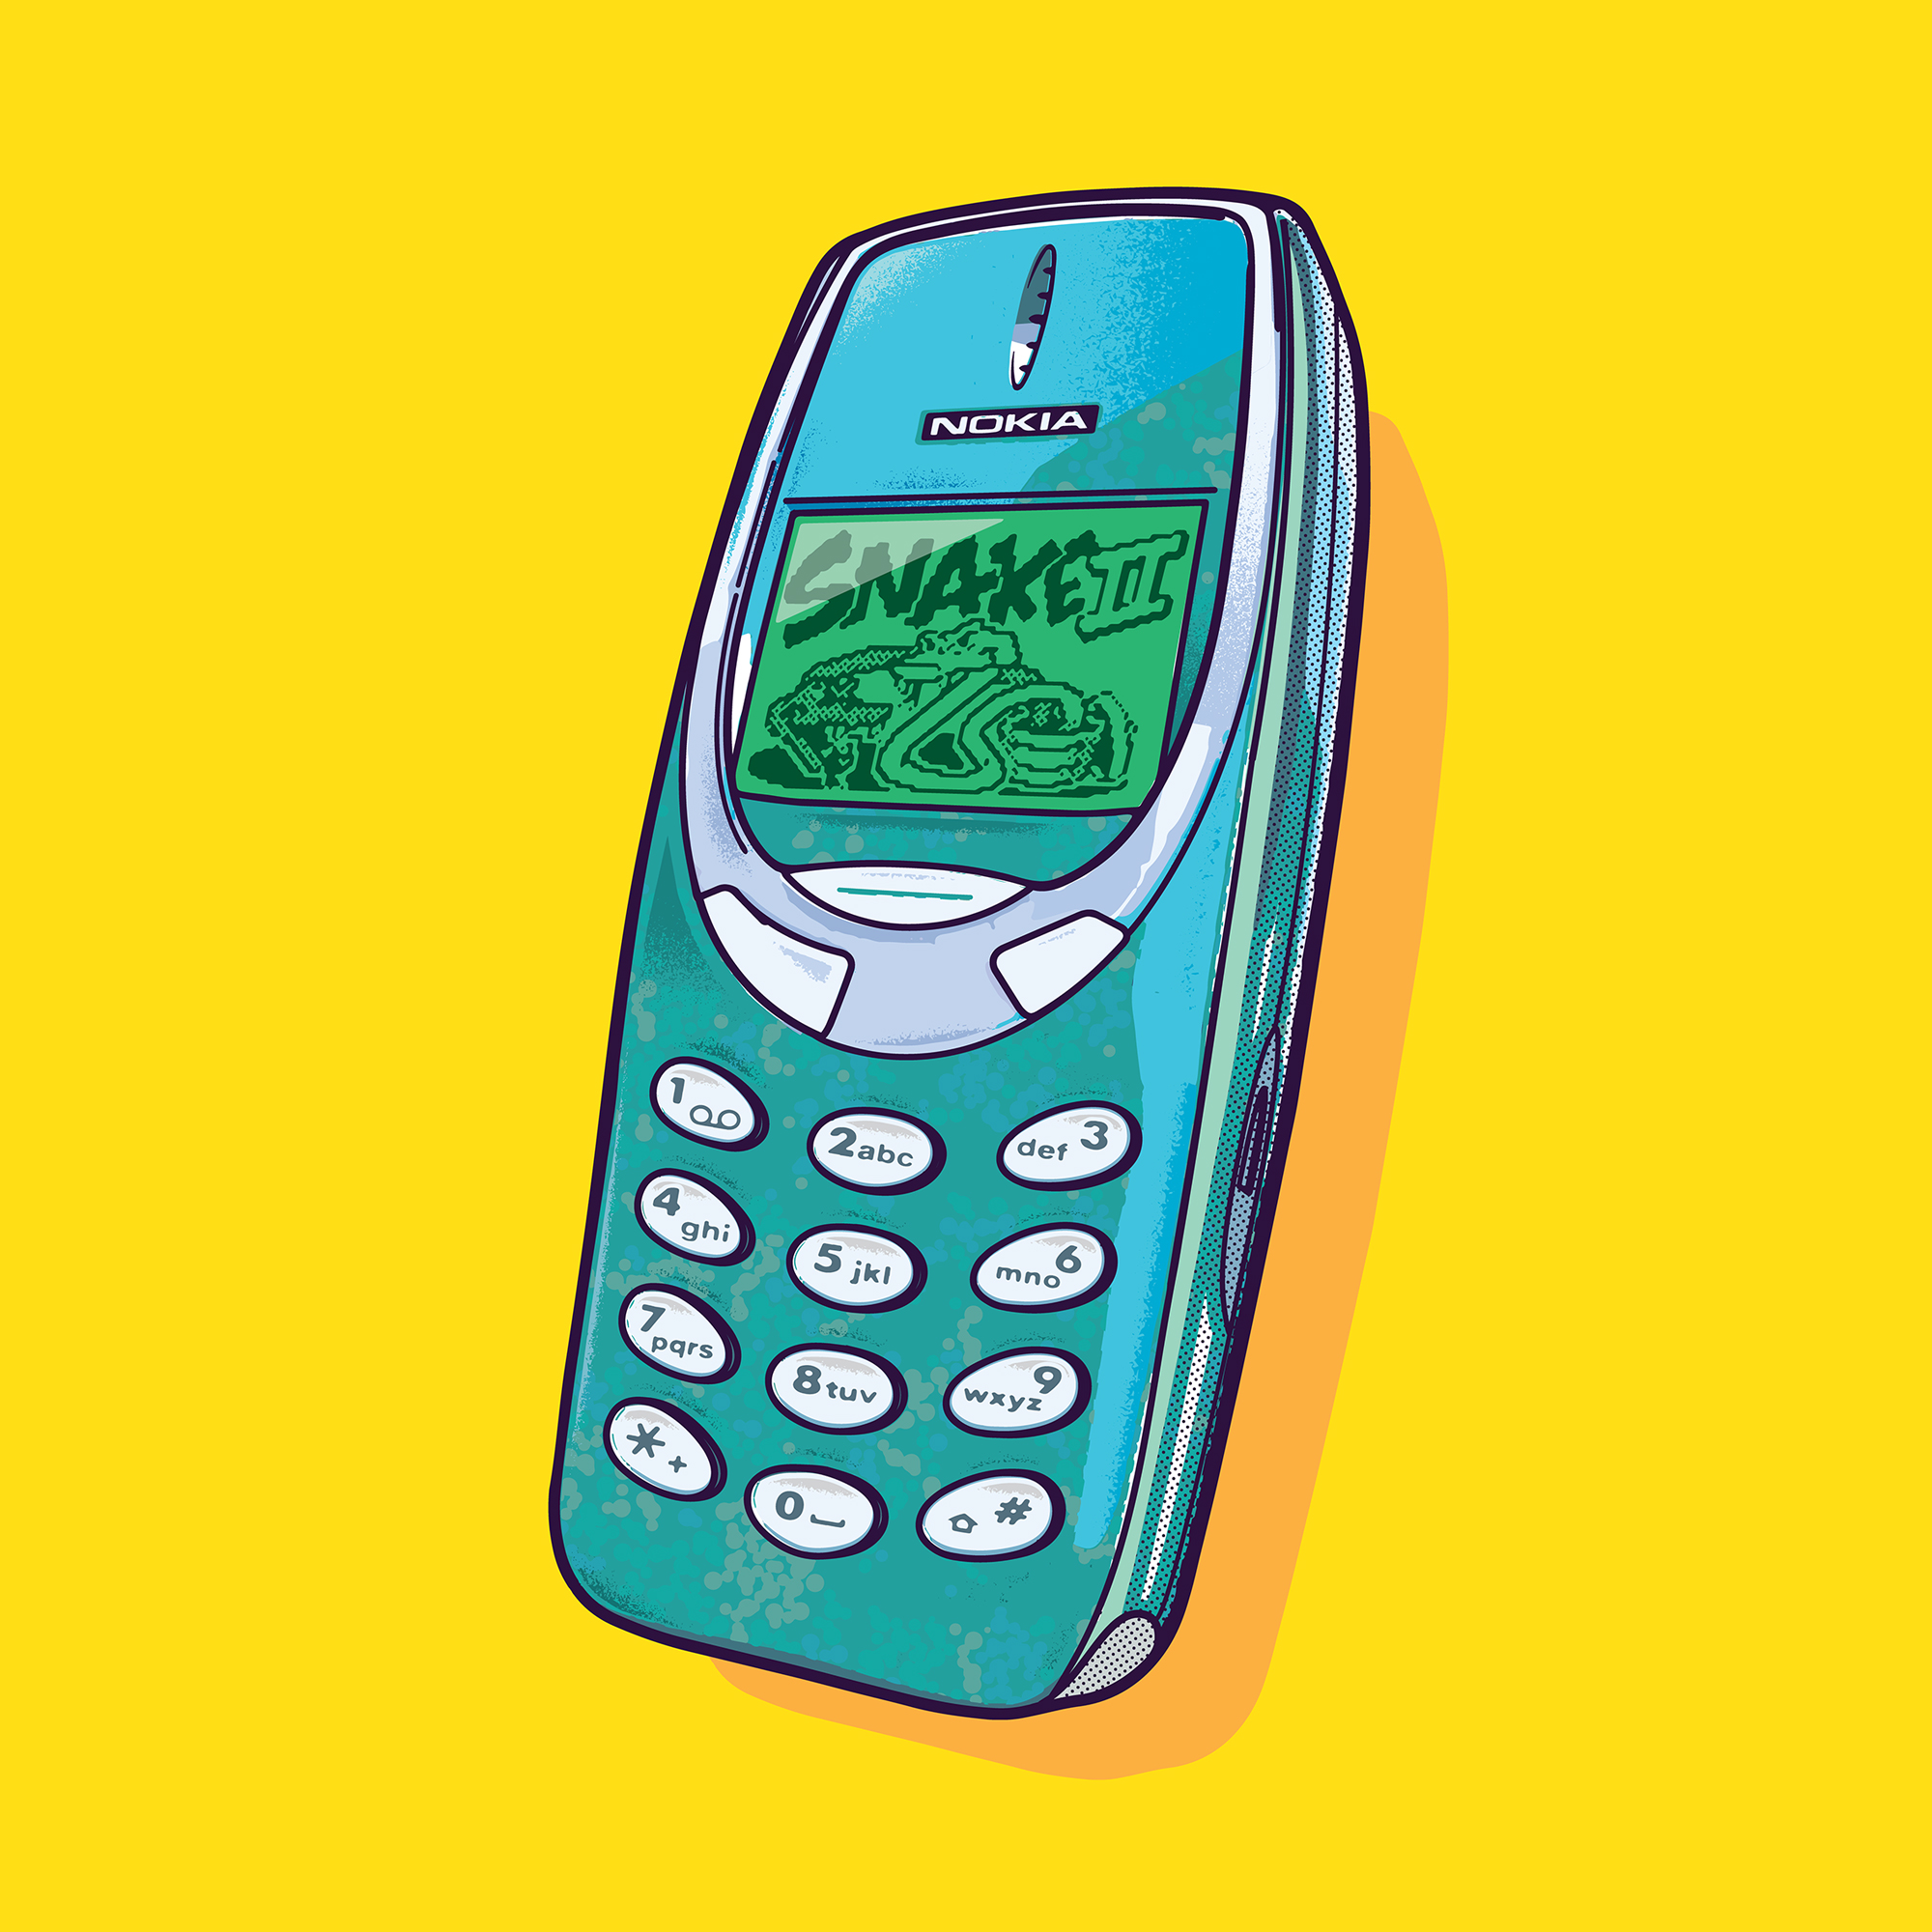 Childhood Objects Illustrations From The 90s By Bert Musketon